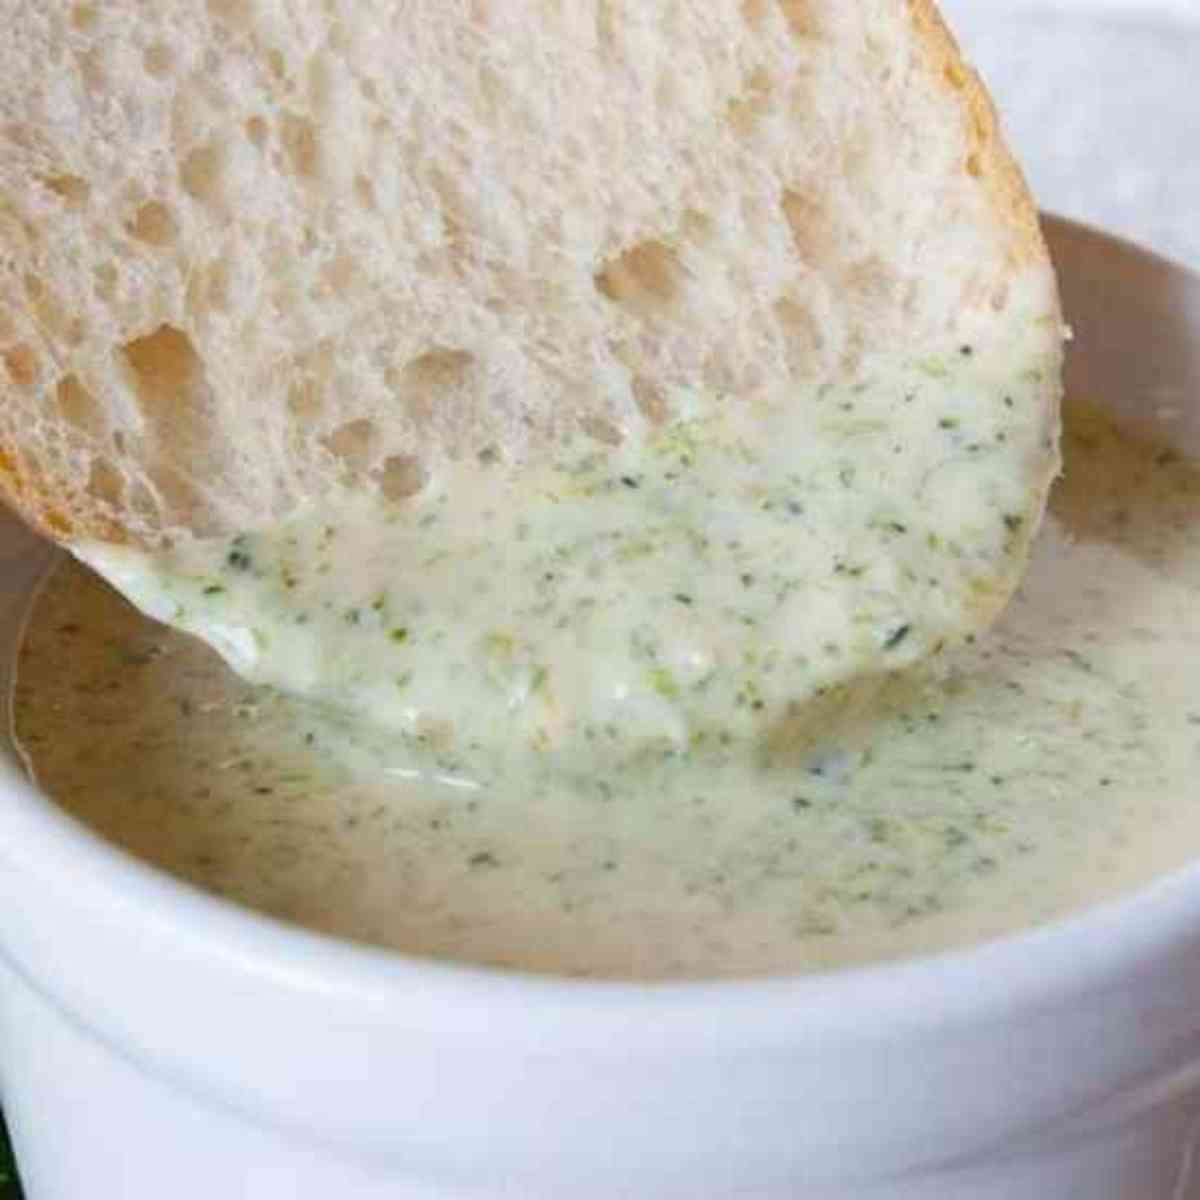 A Hot Bowl of Broccoli Cheese Soup